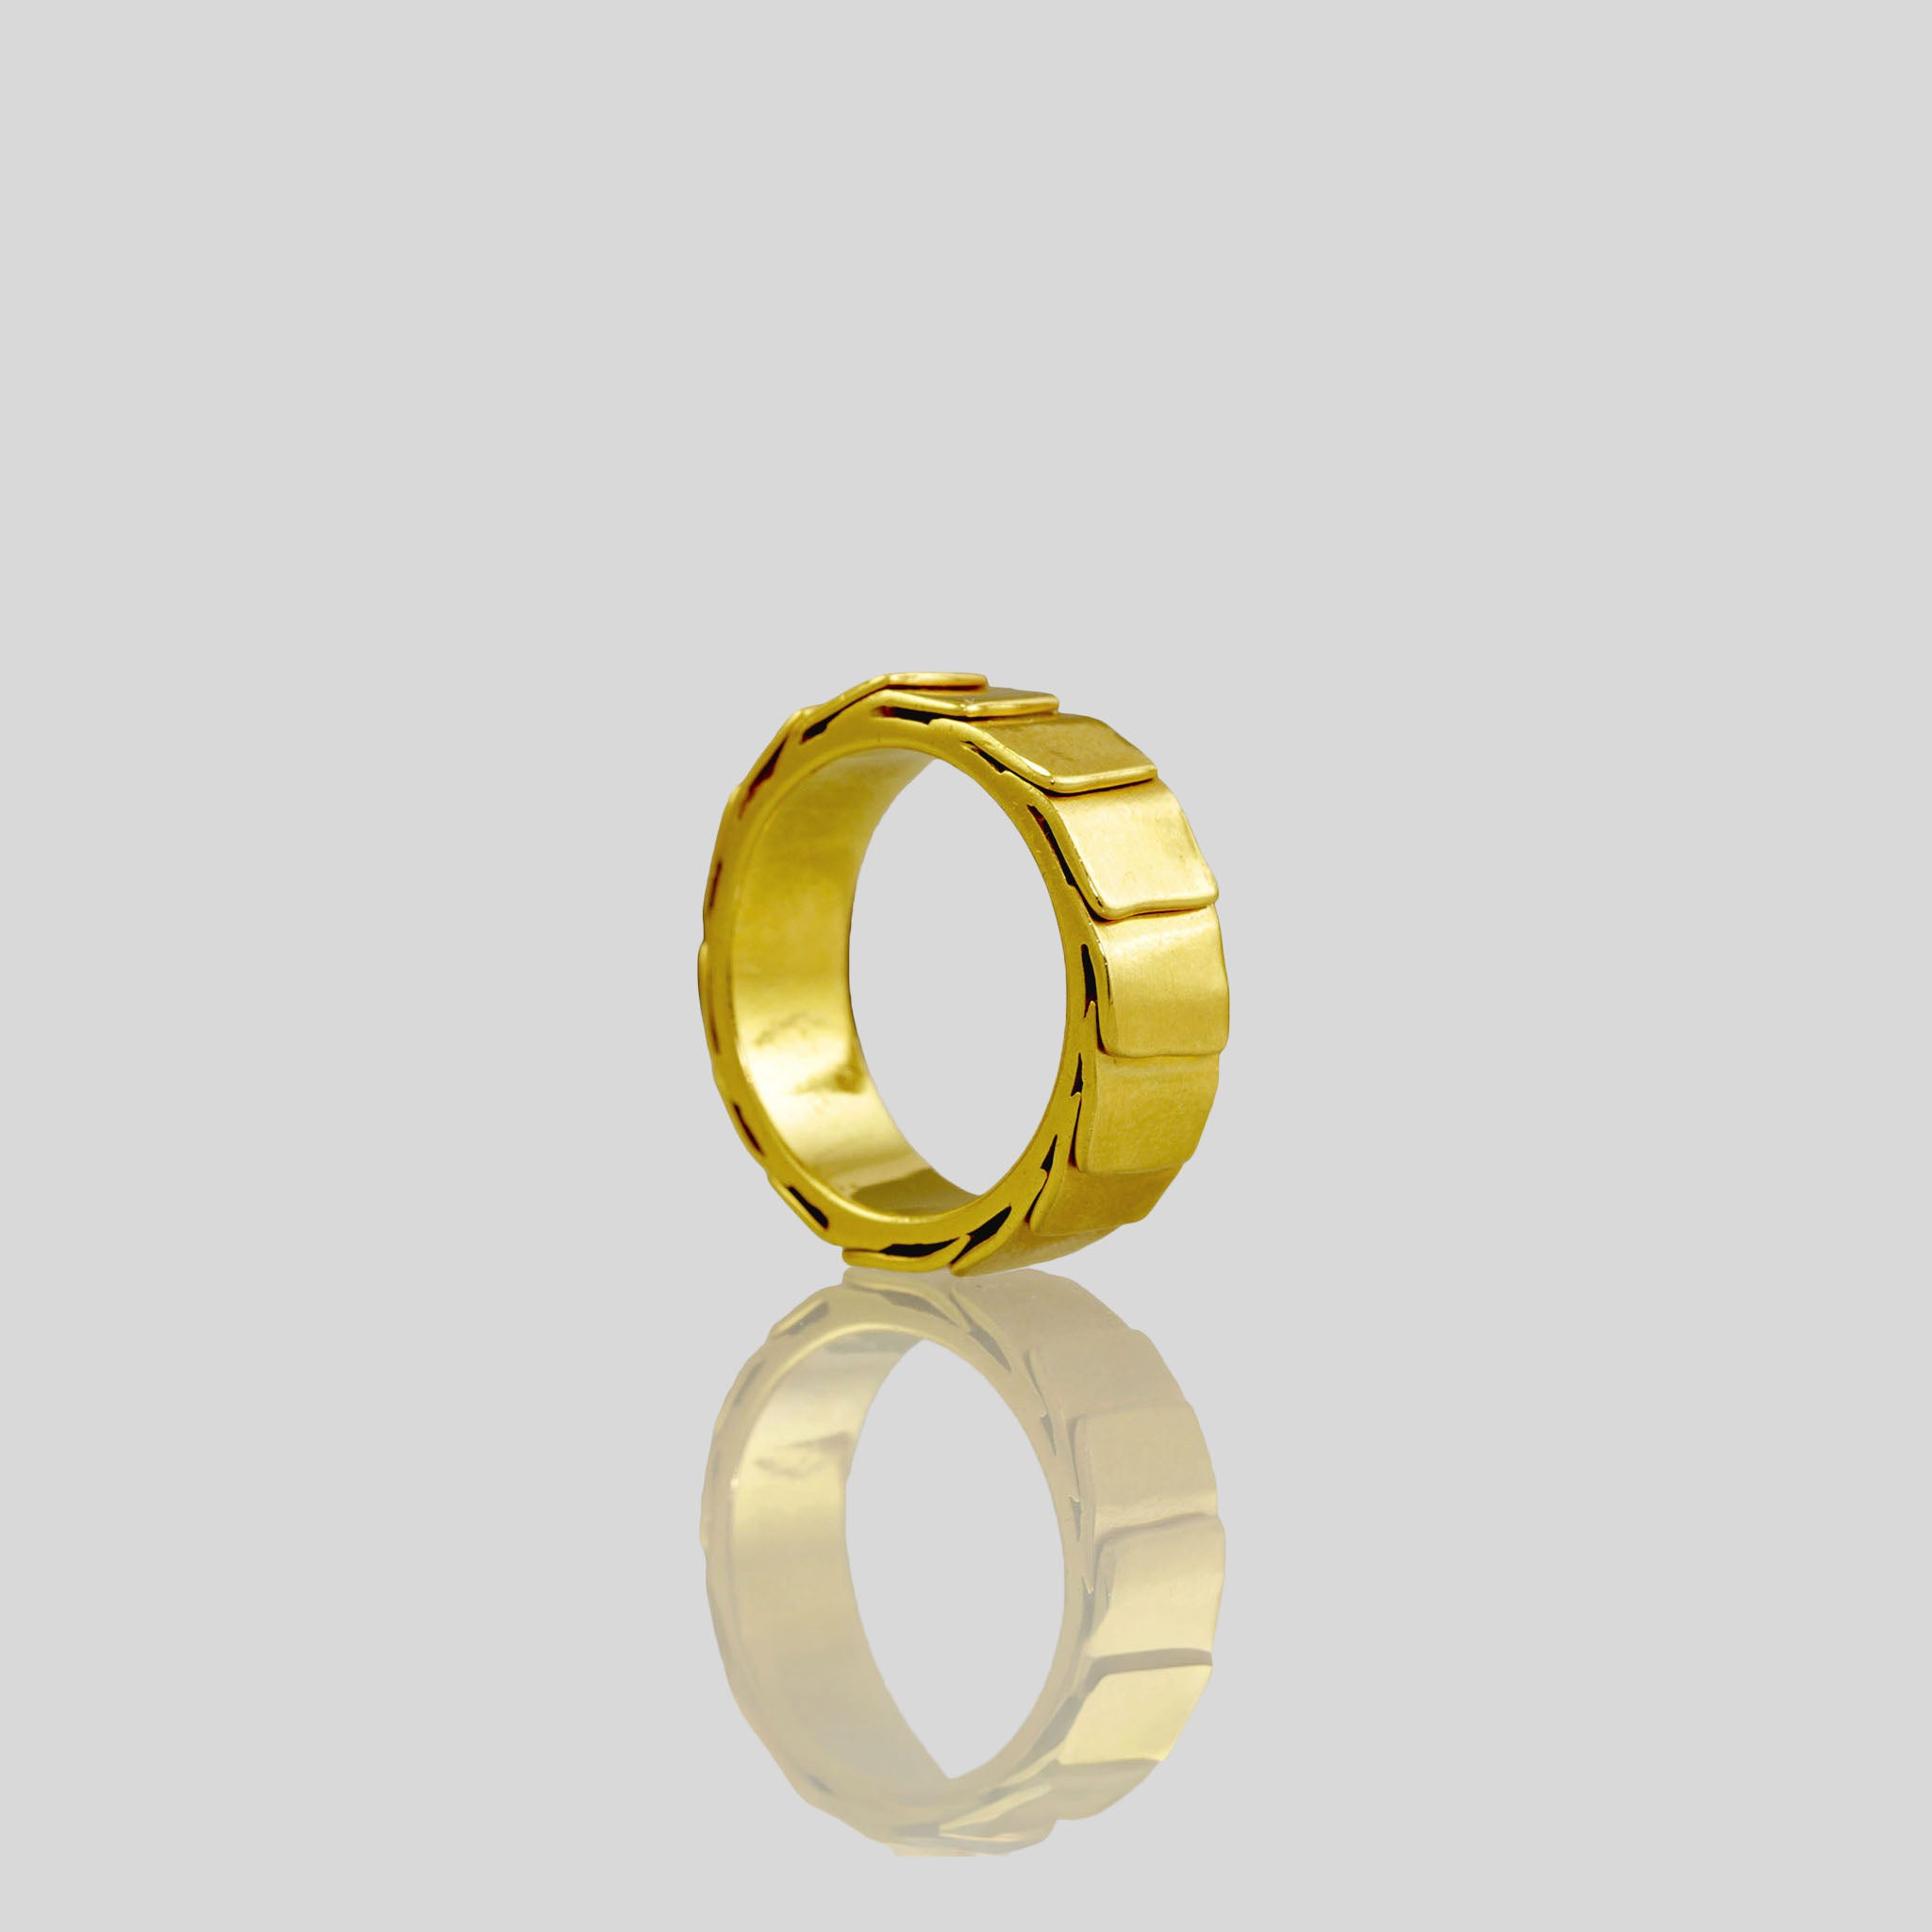 18k Gold ring with overlapping layers, evoking a sense of perpetual motion and embrace. Smooth inner surface ensures maximum comfort.